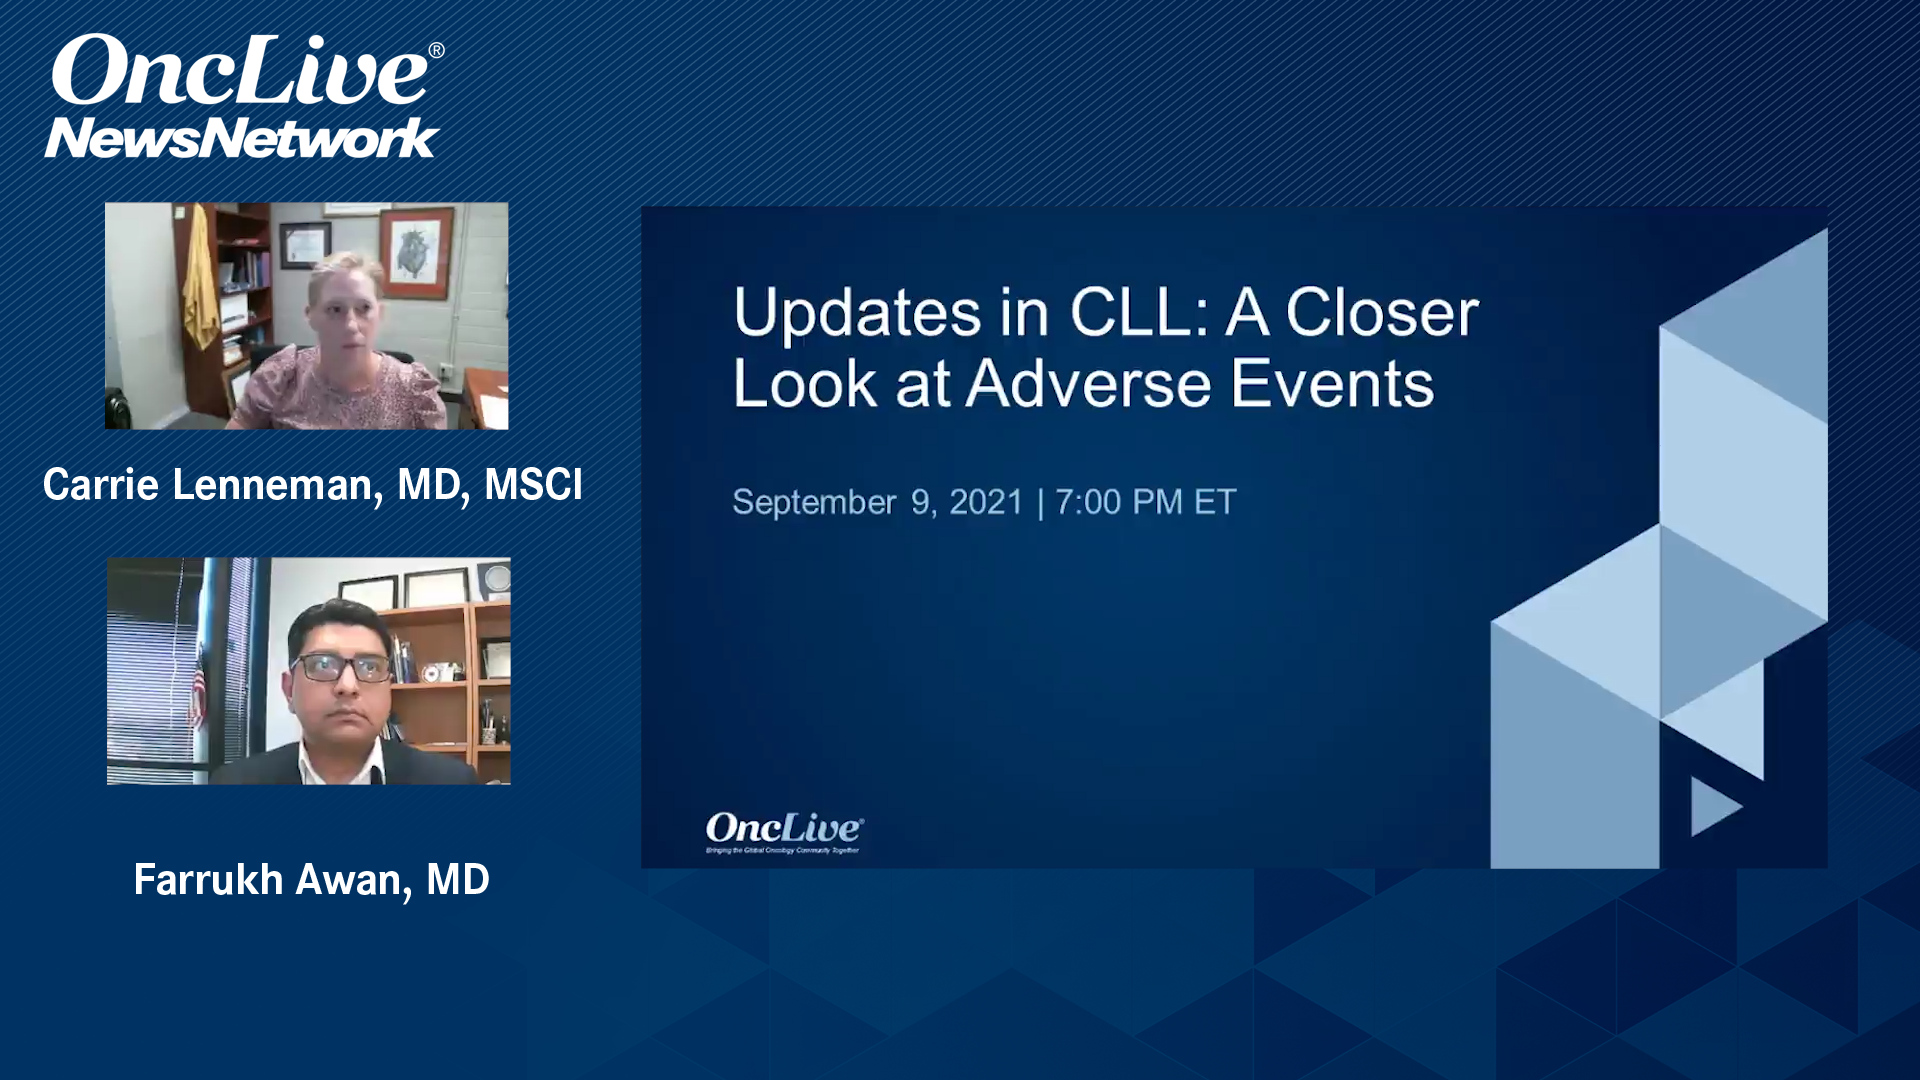 Updates in CLL: A Closer Look at Adverse Events